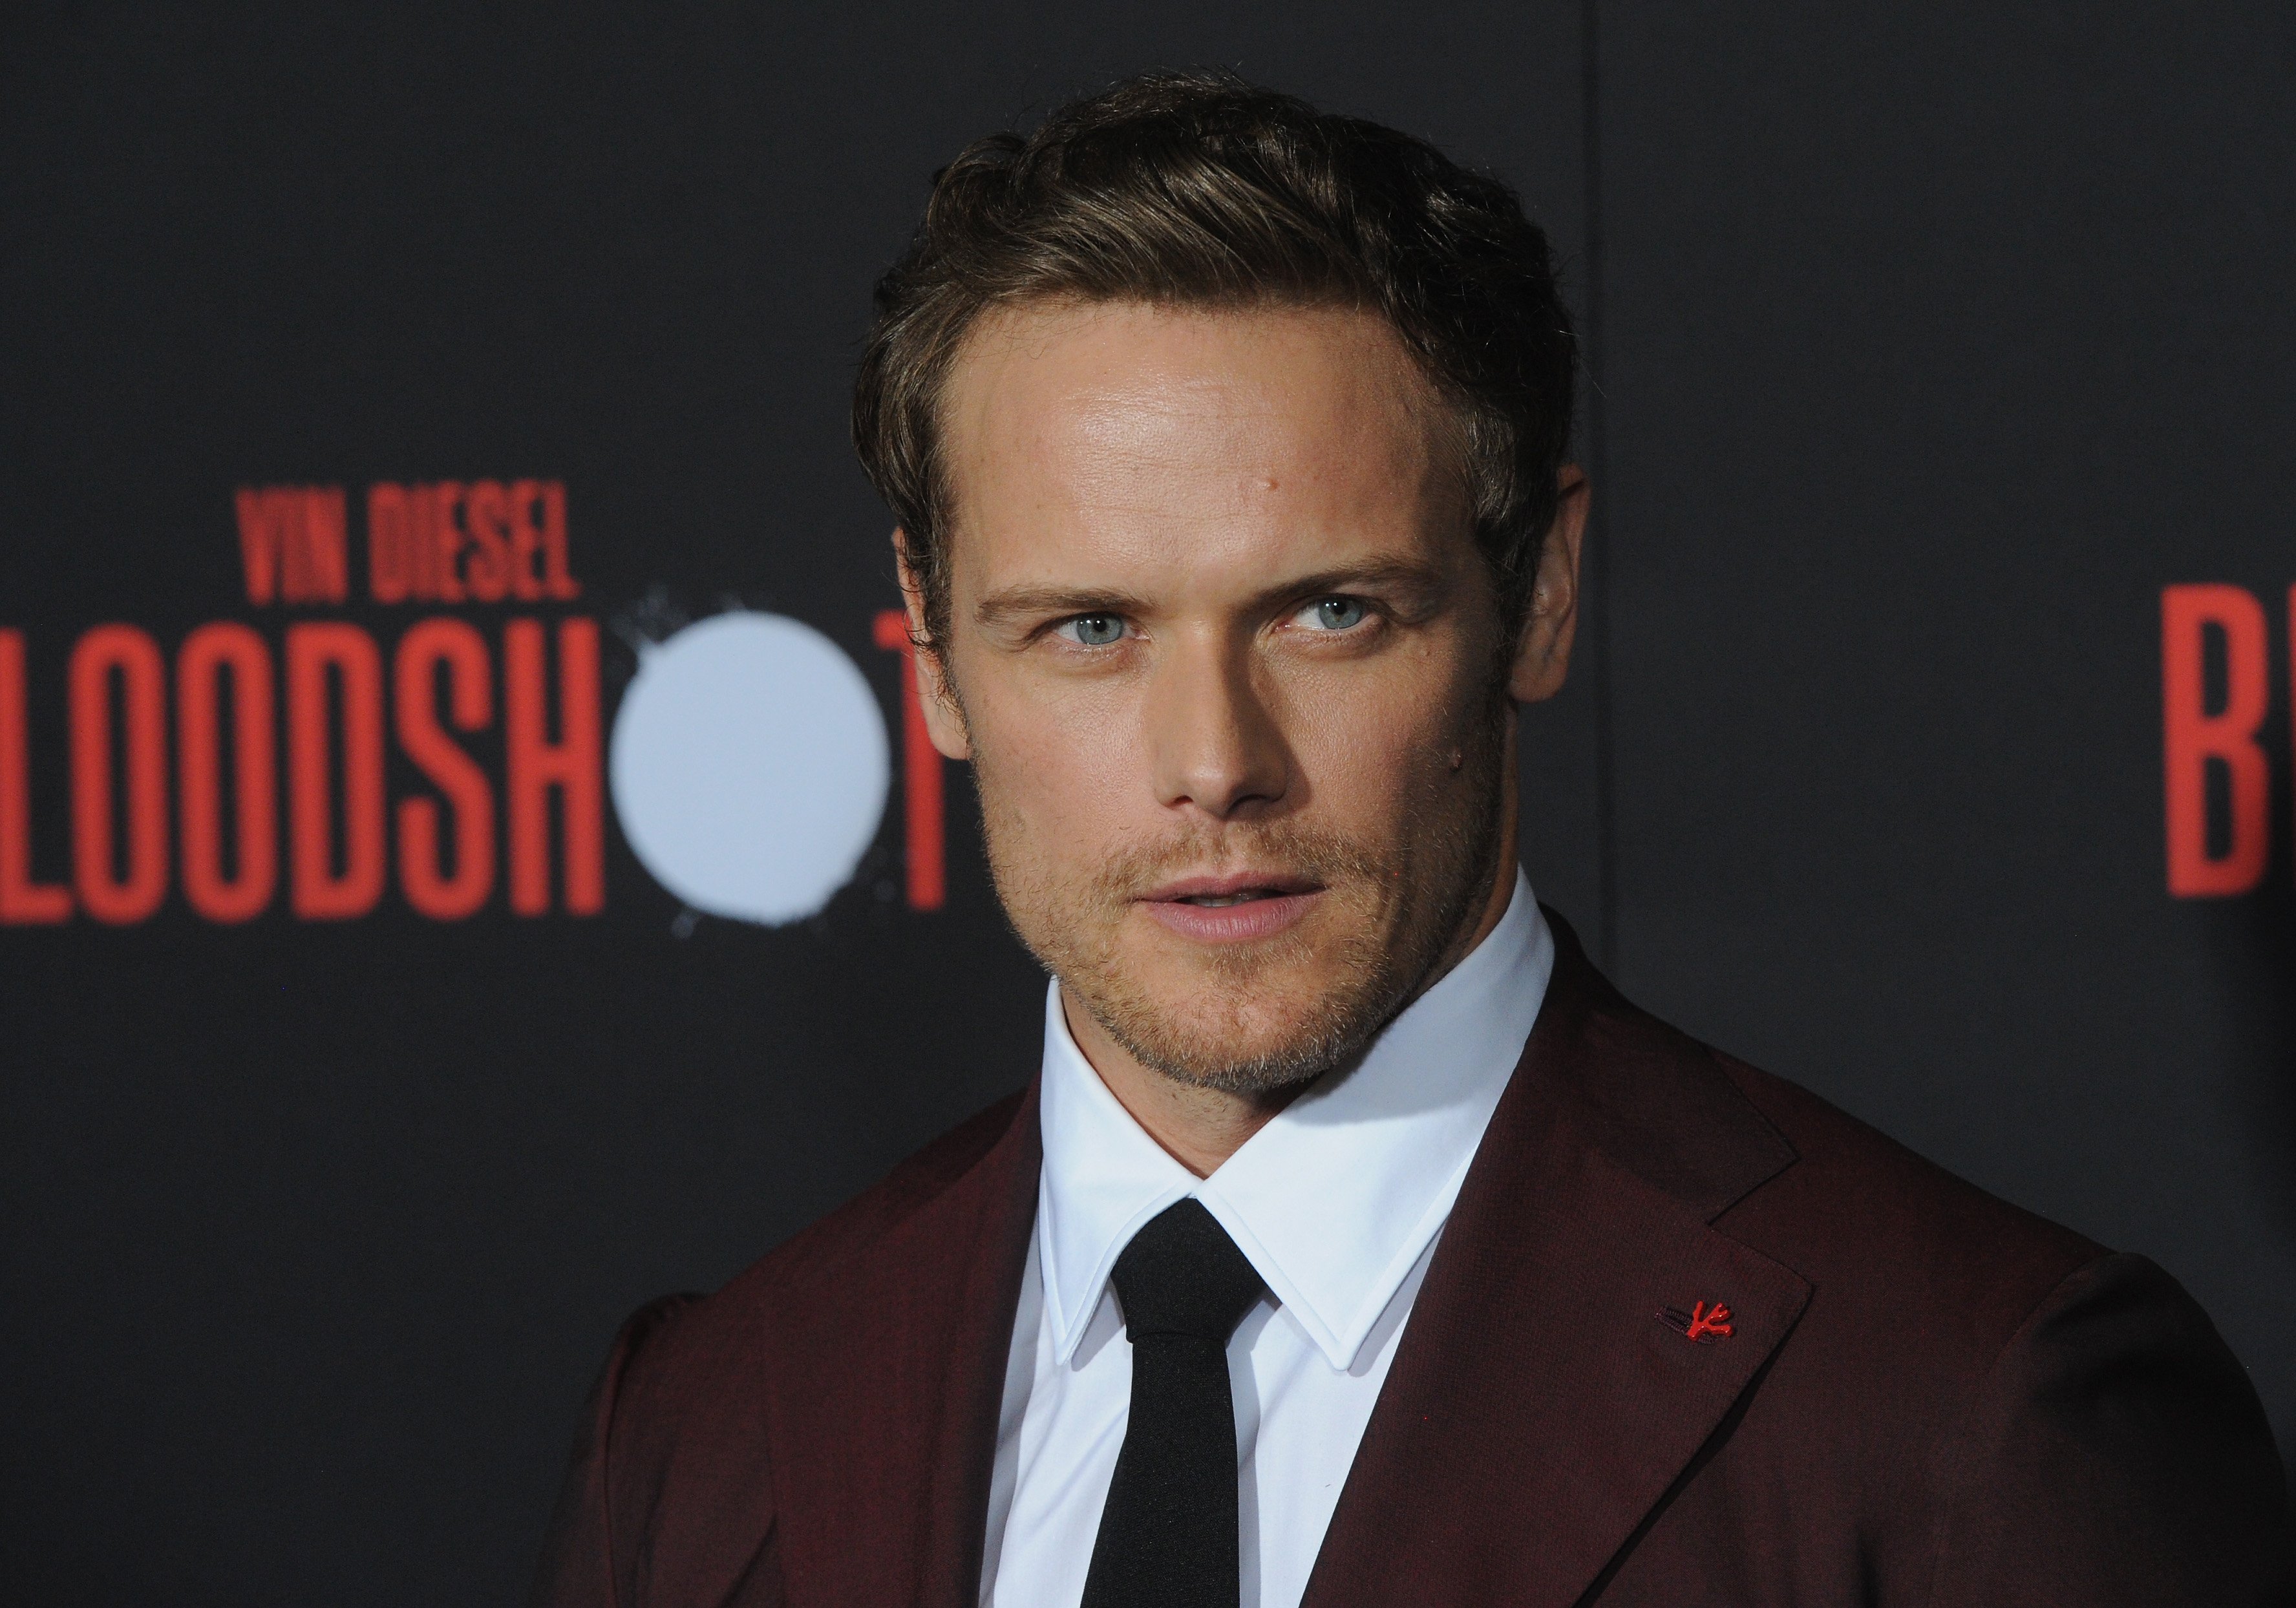 'Outlander' star Sam Heughan arrives for the Premiere Of Sony Pictures' "Bloodshot" held at The Regency Village on March 10, 2020